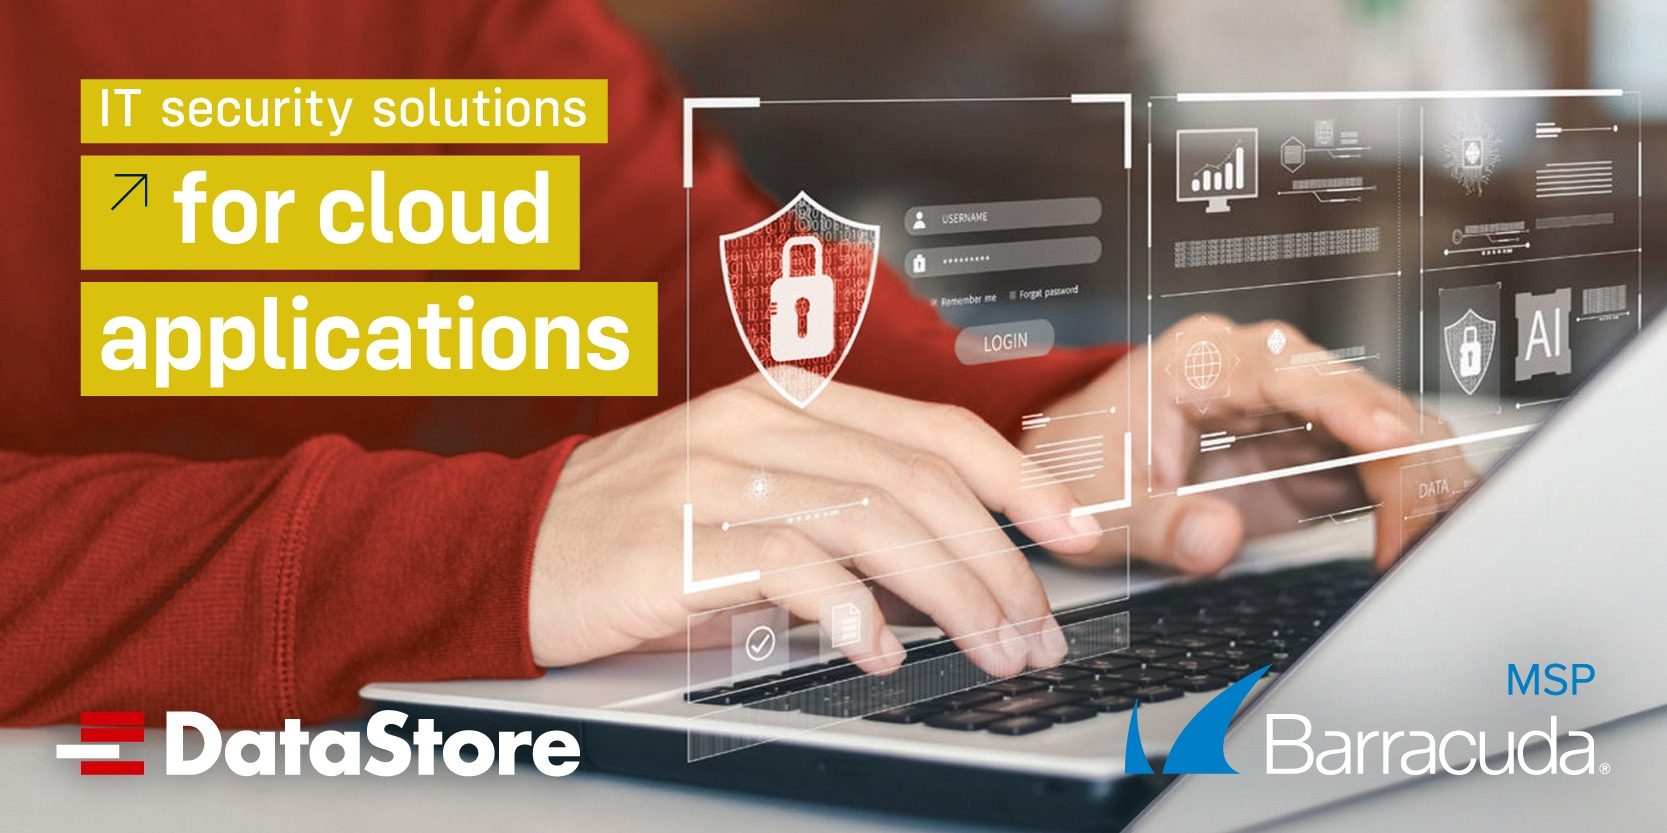 Barracuda MSP: IT security solutions for cloud applications